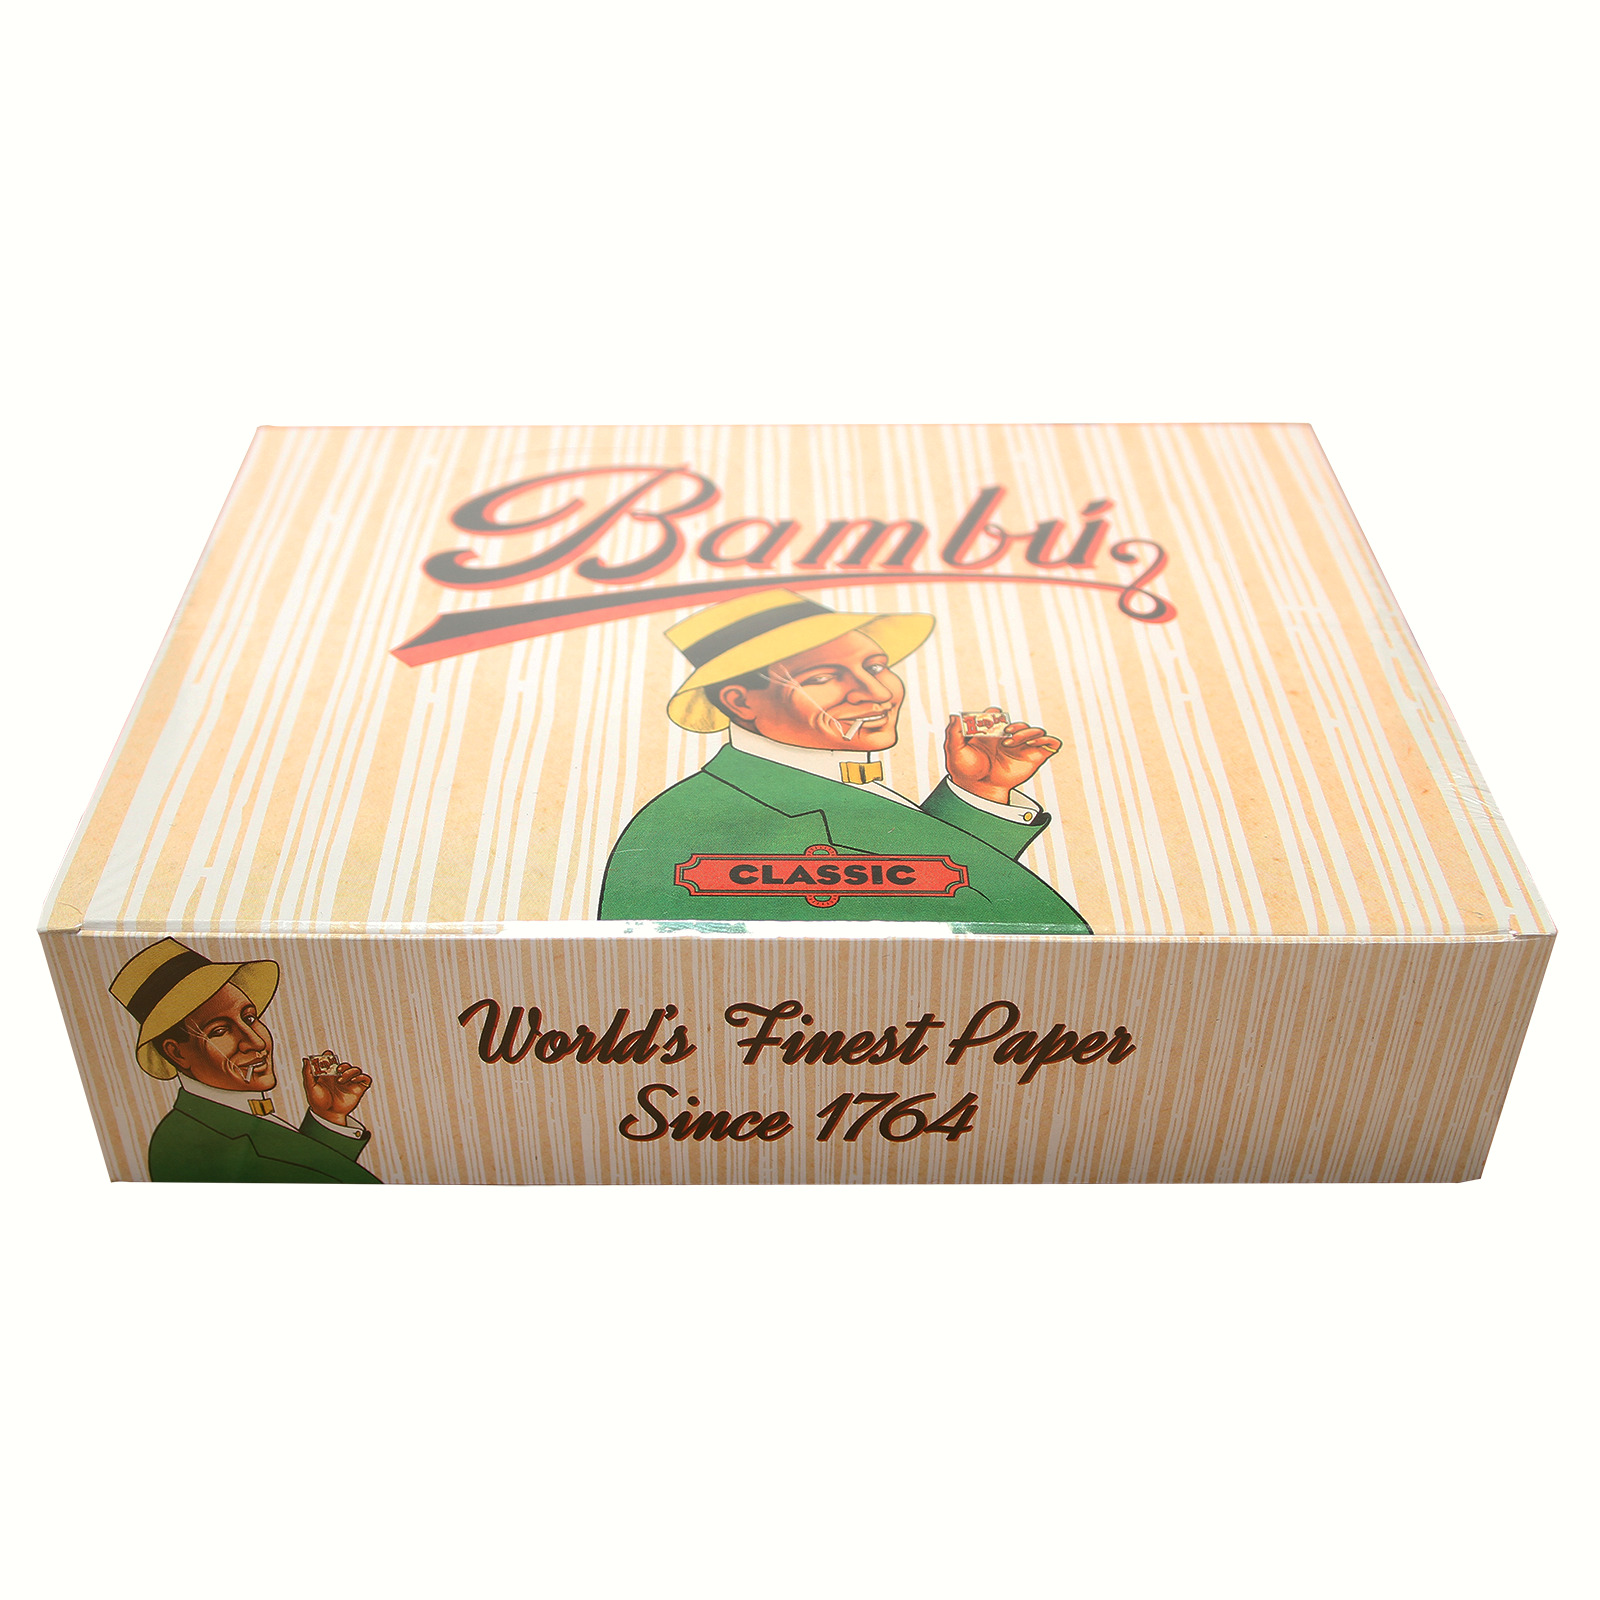 Bambu Classic Cigarette Rolling Papers Booklets - Box of 100